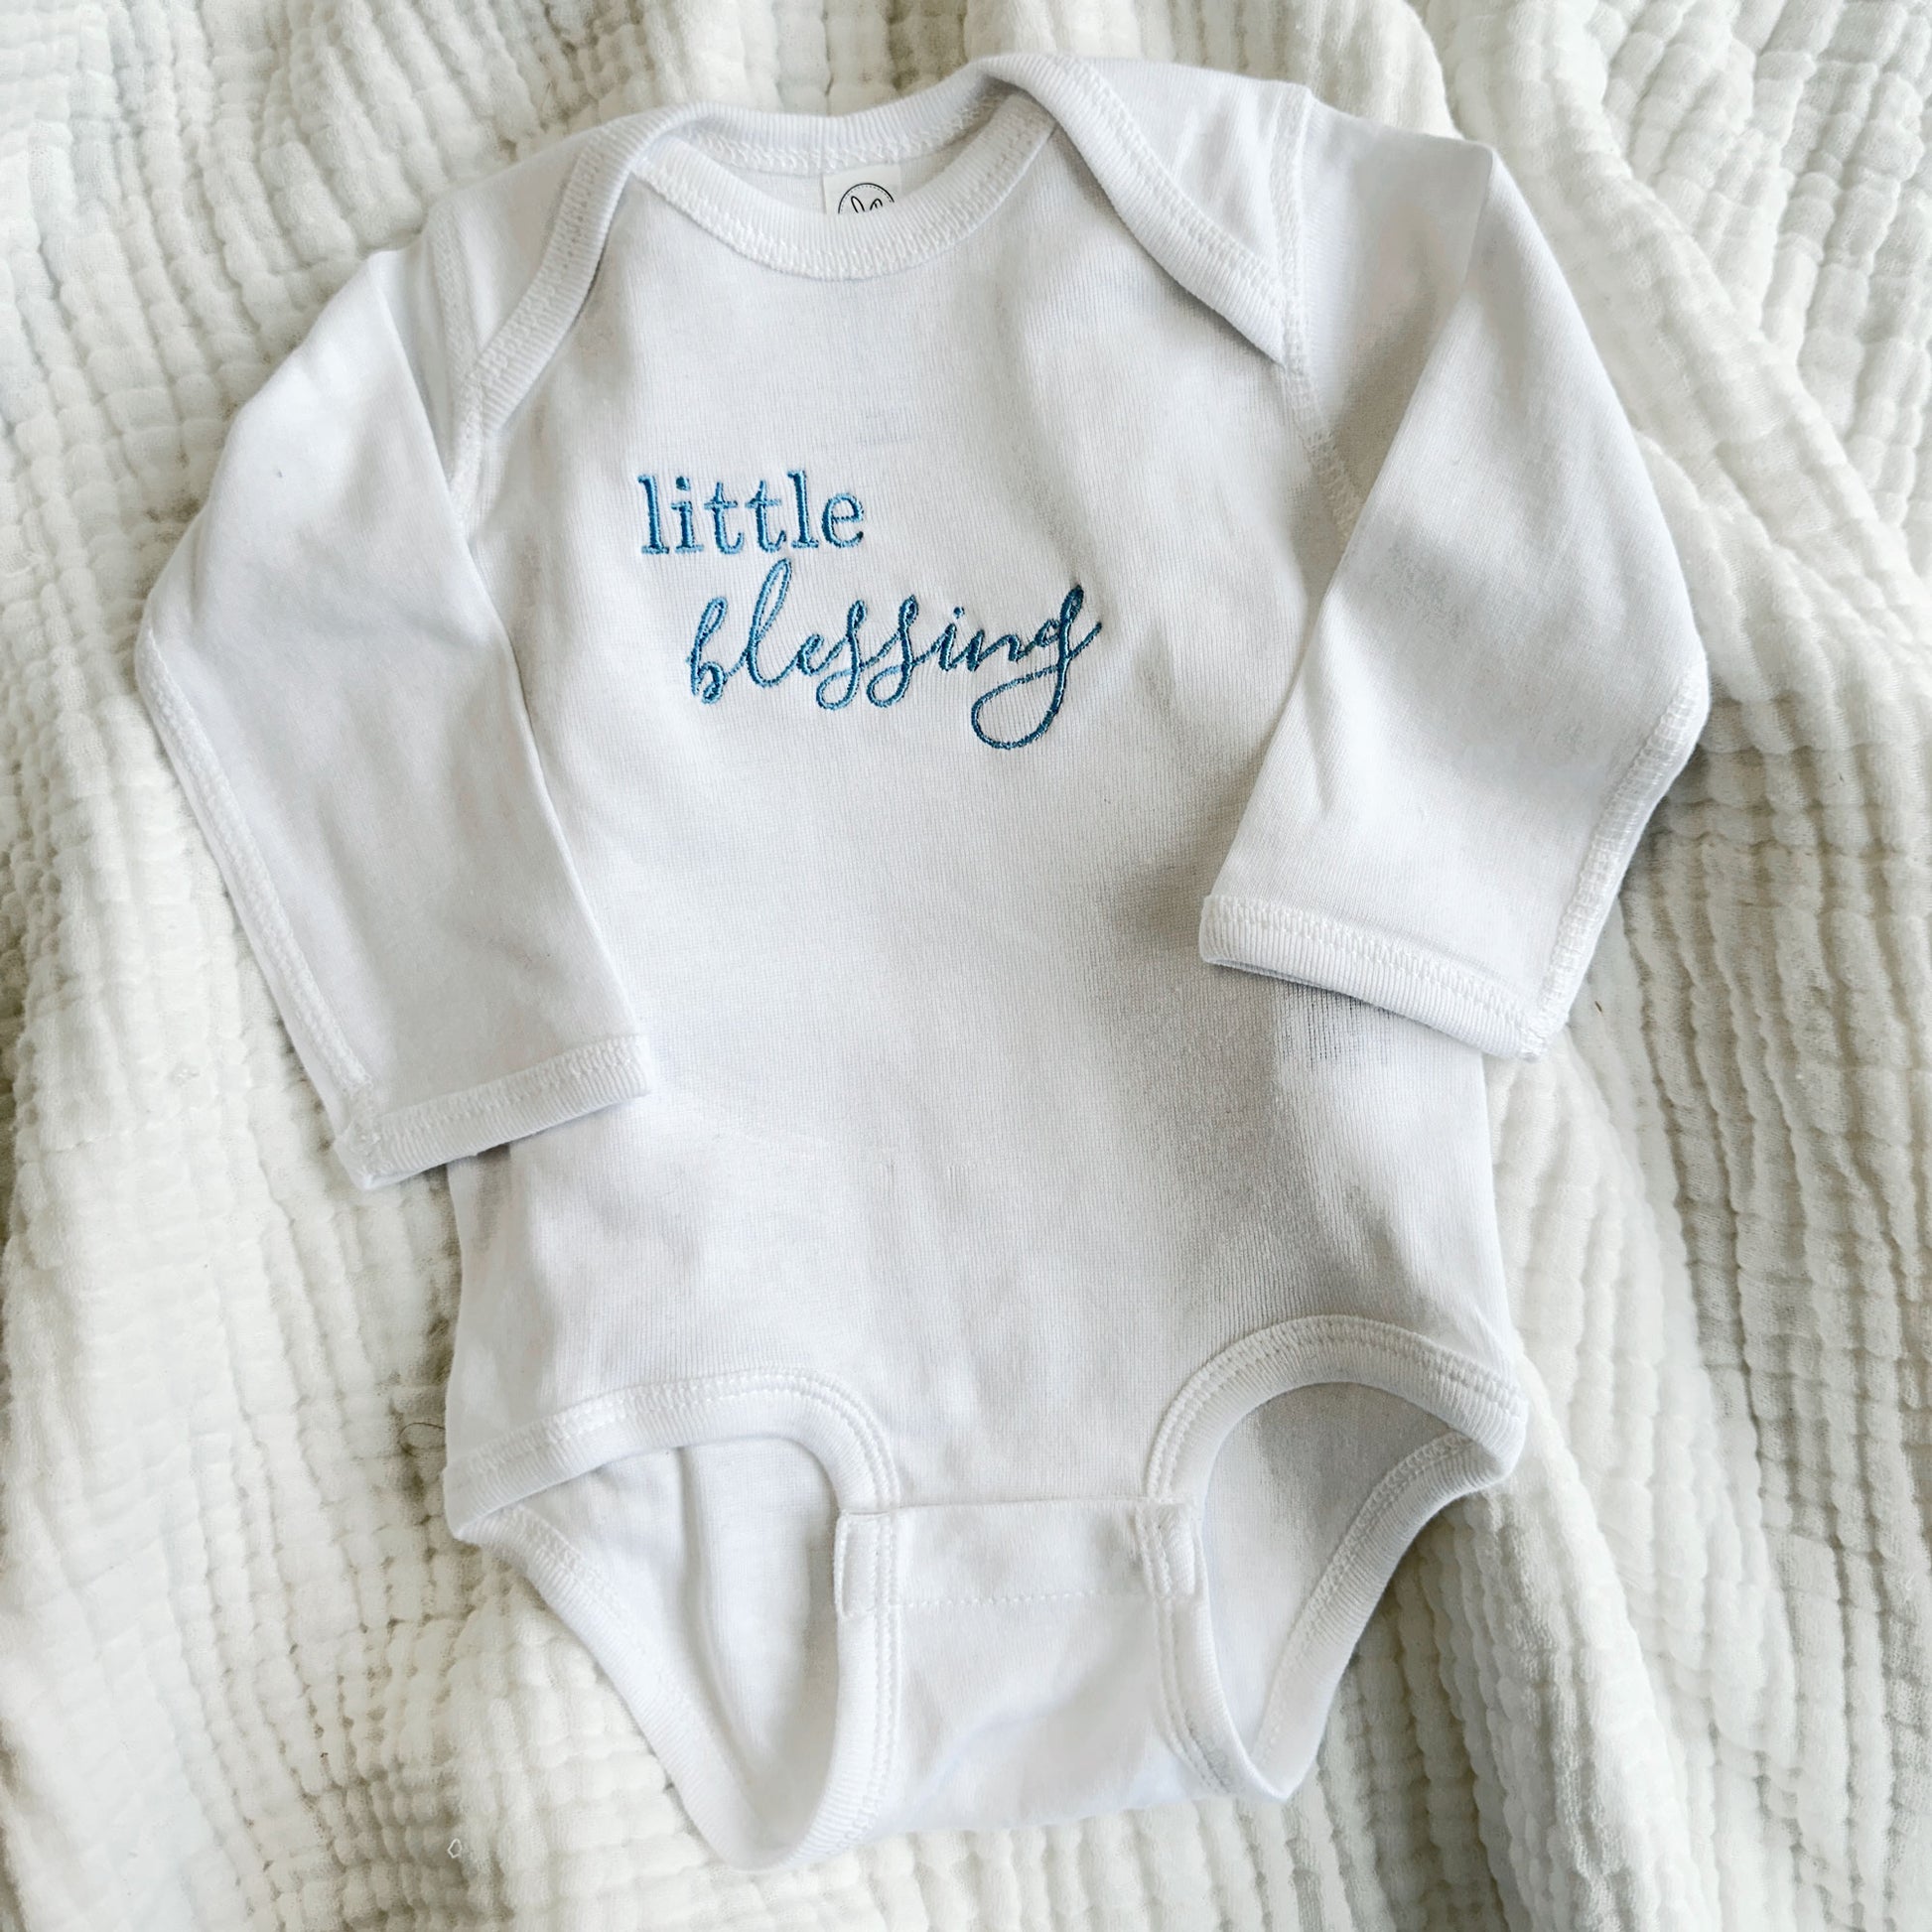 white baby long sleeve bodysuit with a cute little blessings embroidered design on the center chest